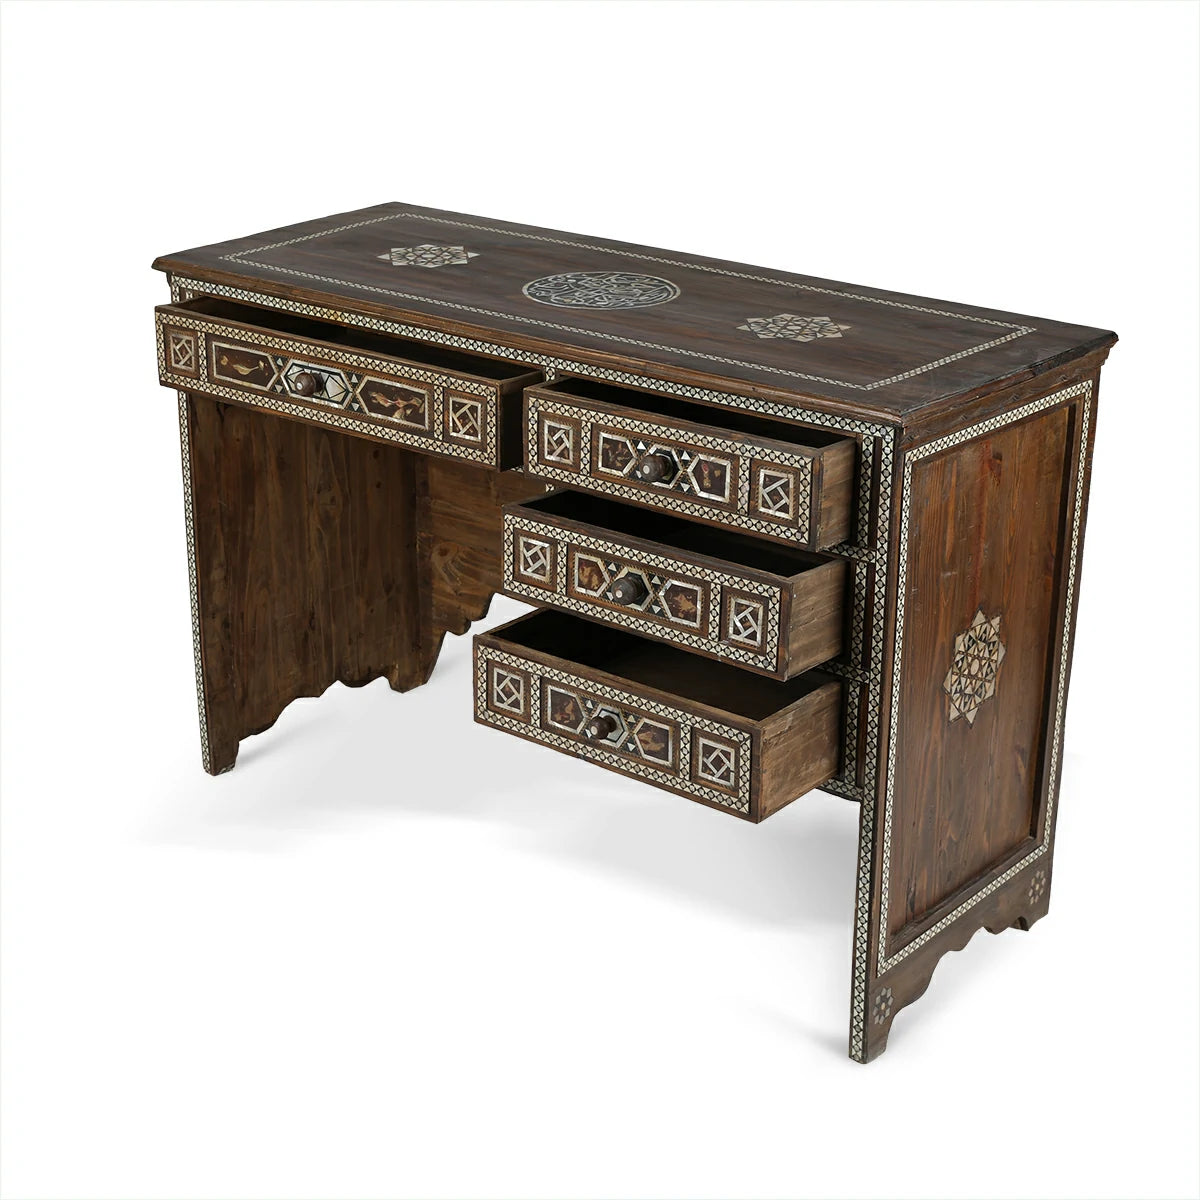 Angled Back View Of Arabian Calligraphic Motif Desk with Open Chest of Drawers